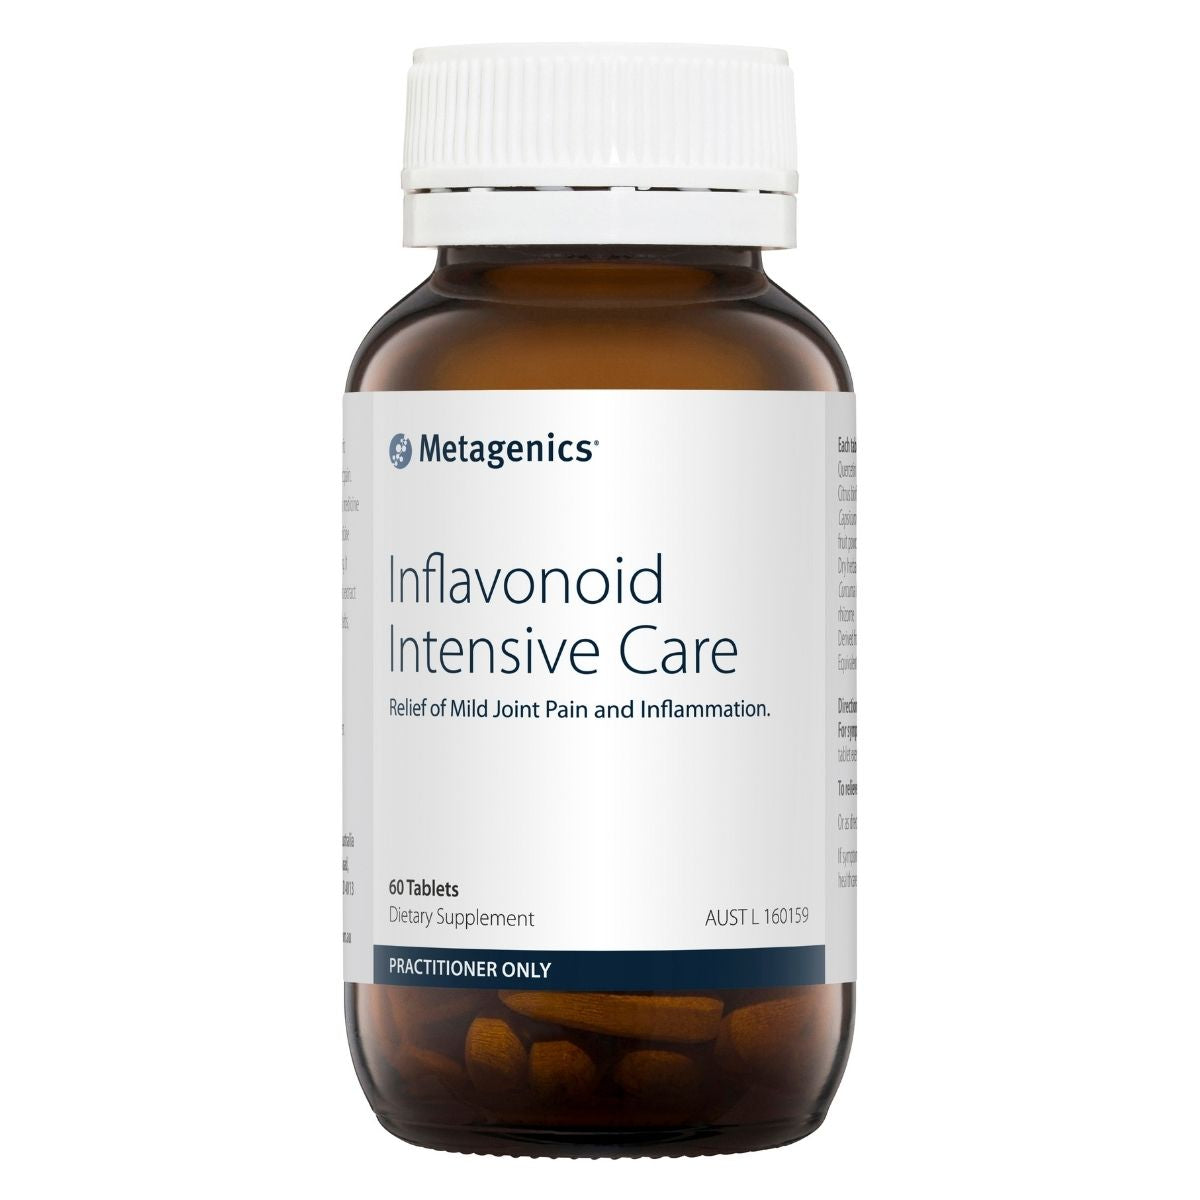 Metagenics Inflavonoid Intensive Care 60 tablets | Vitality and Wellness Centre